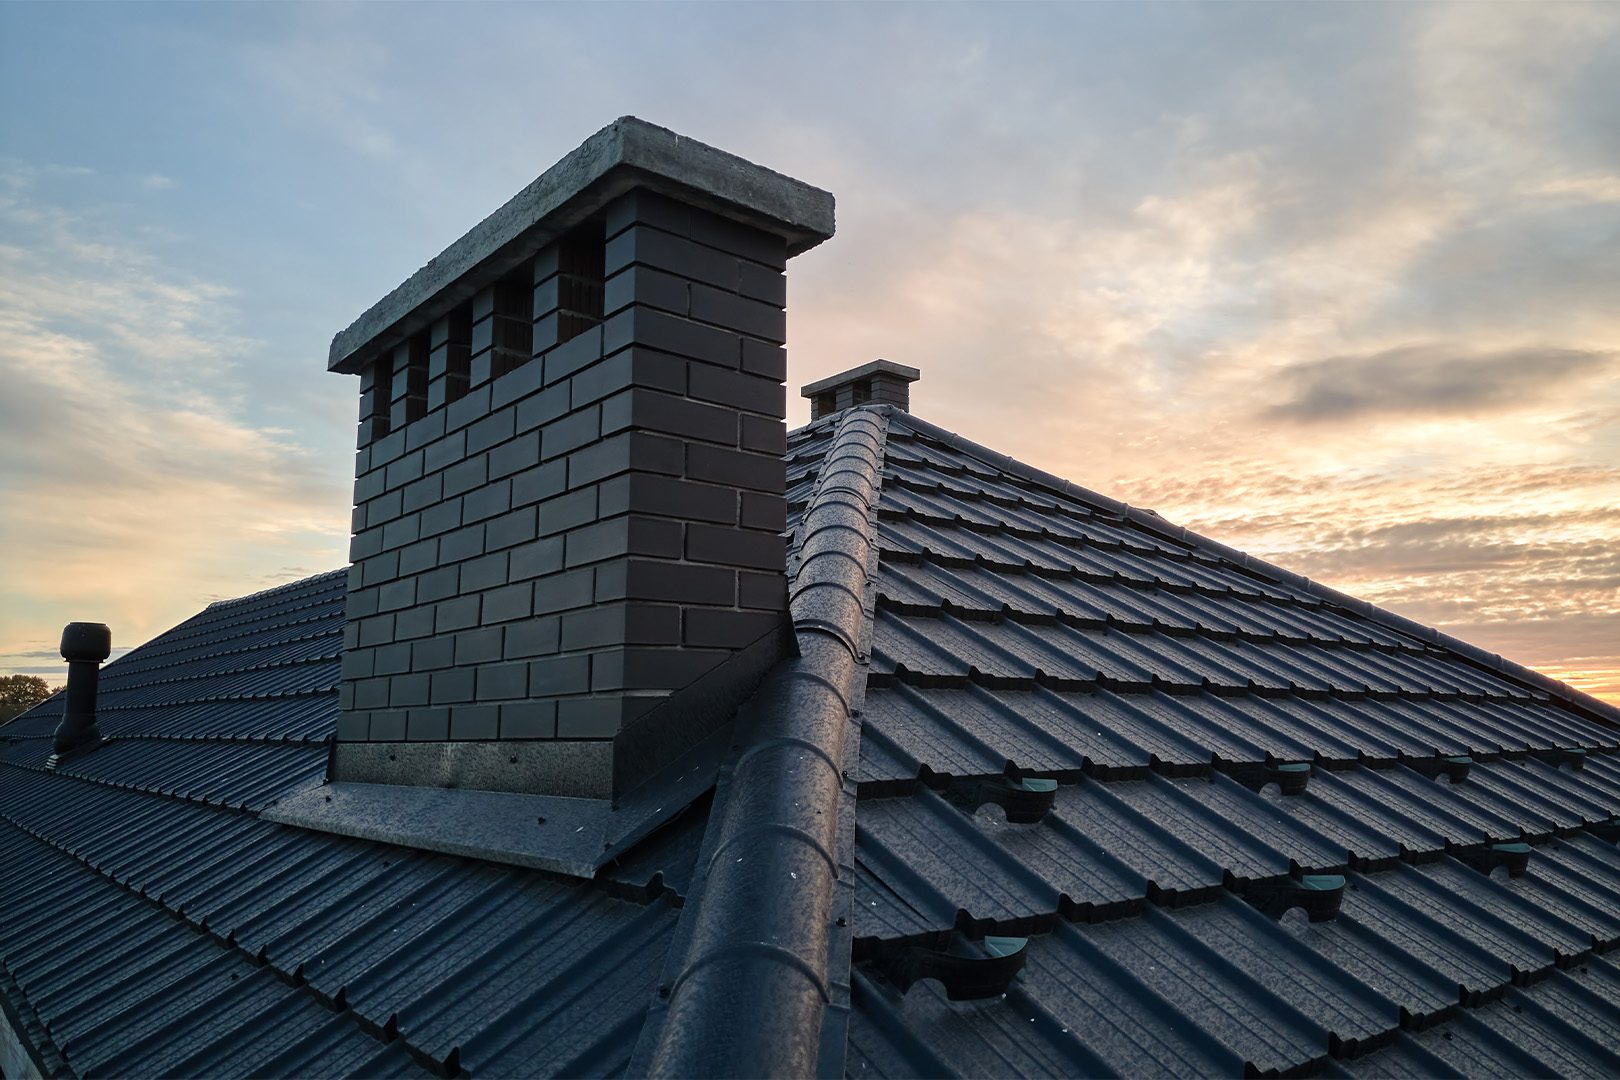 Chimney on house roof top covered with metallic shingles under construction